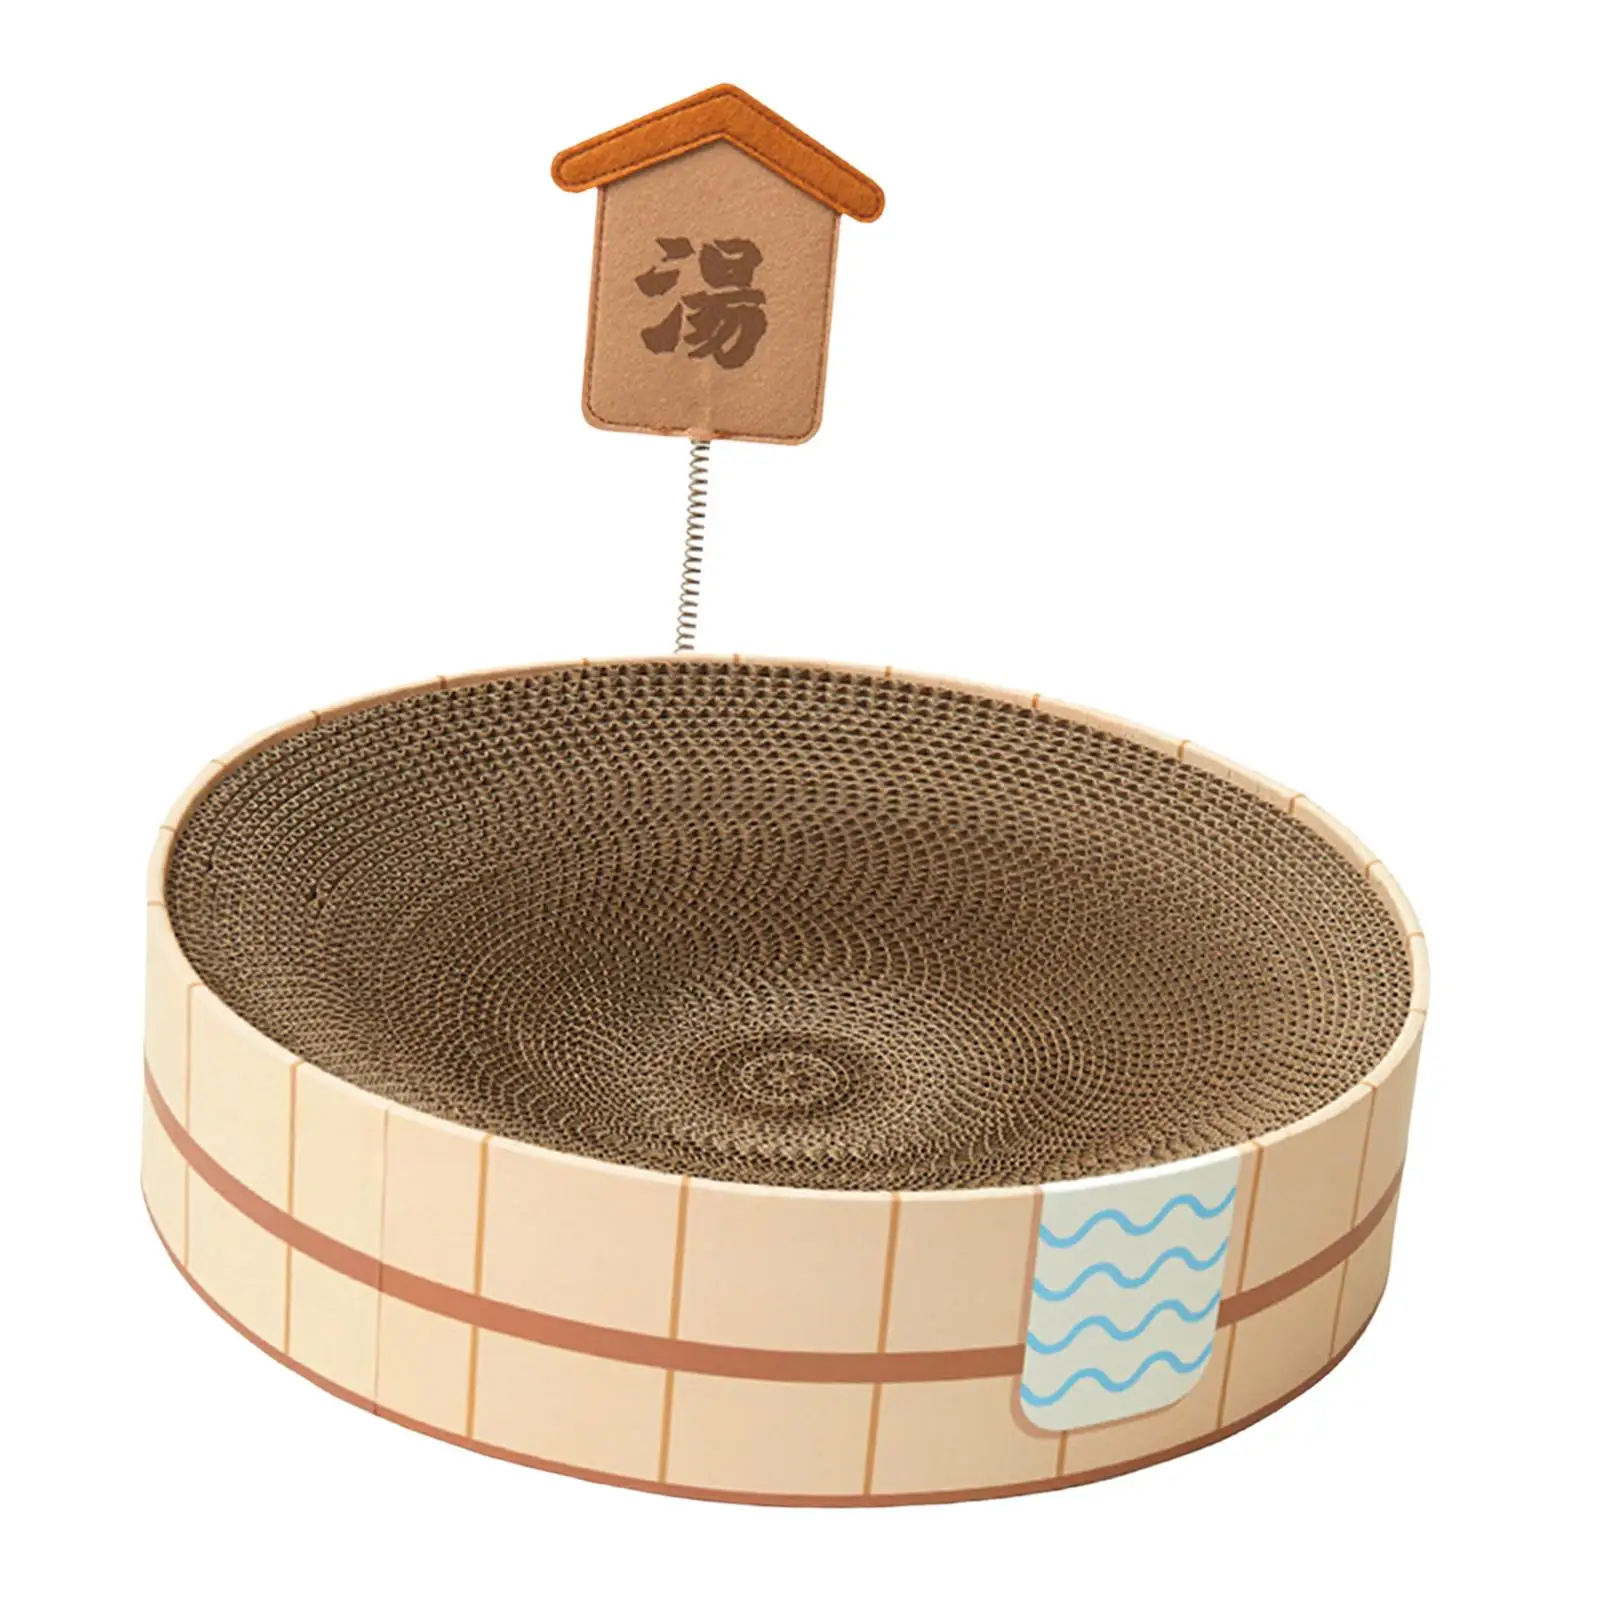 Round Cat Scratcher Cardboard Lounge Bed Cat Scratcher Bowl Sofa Corrugated Scratch Pad for Small Medium Large Cats Playing